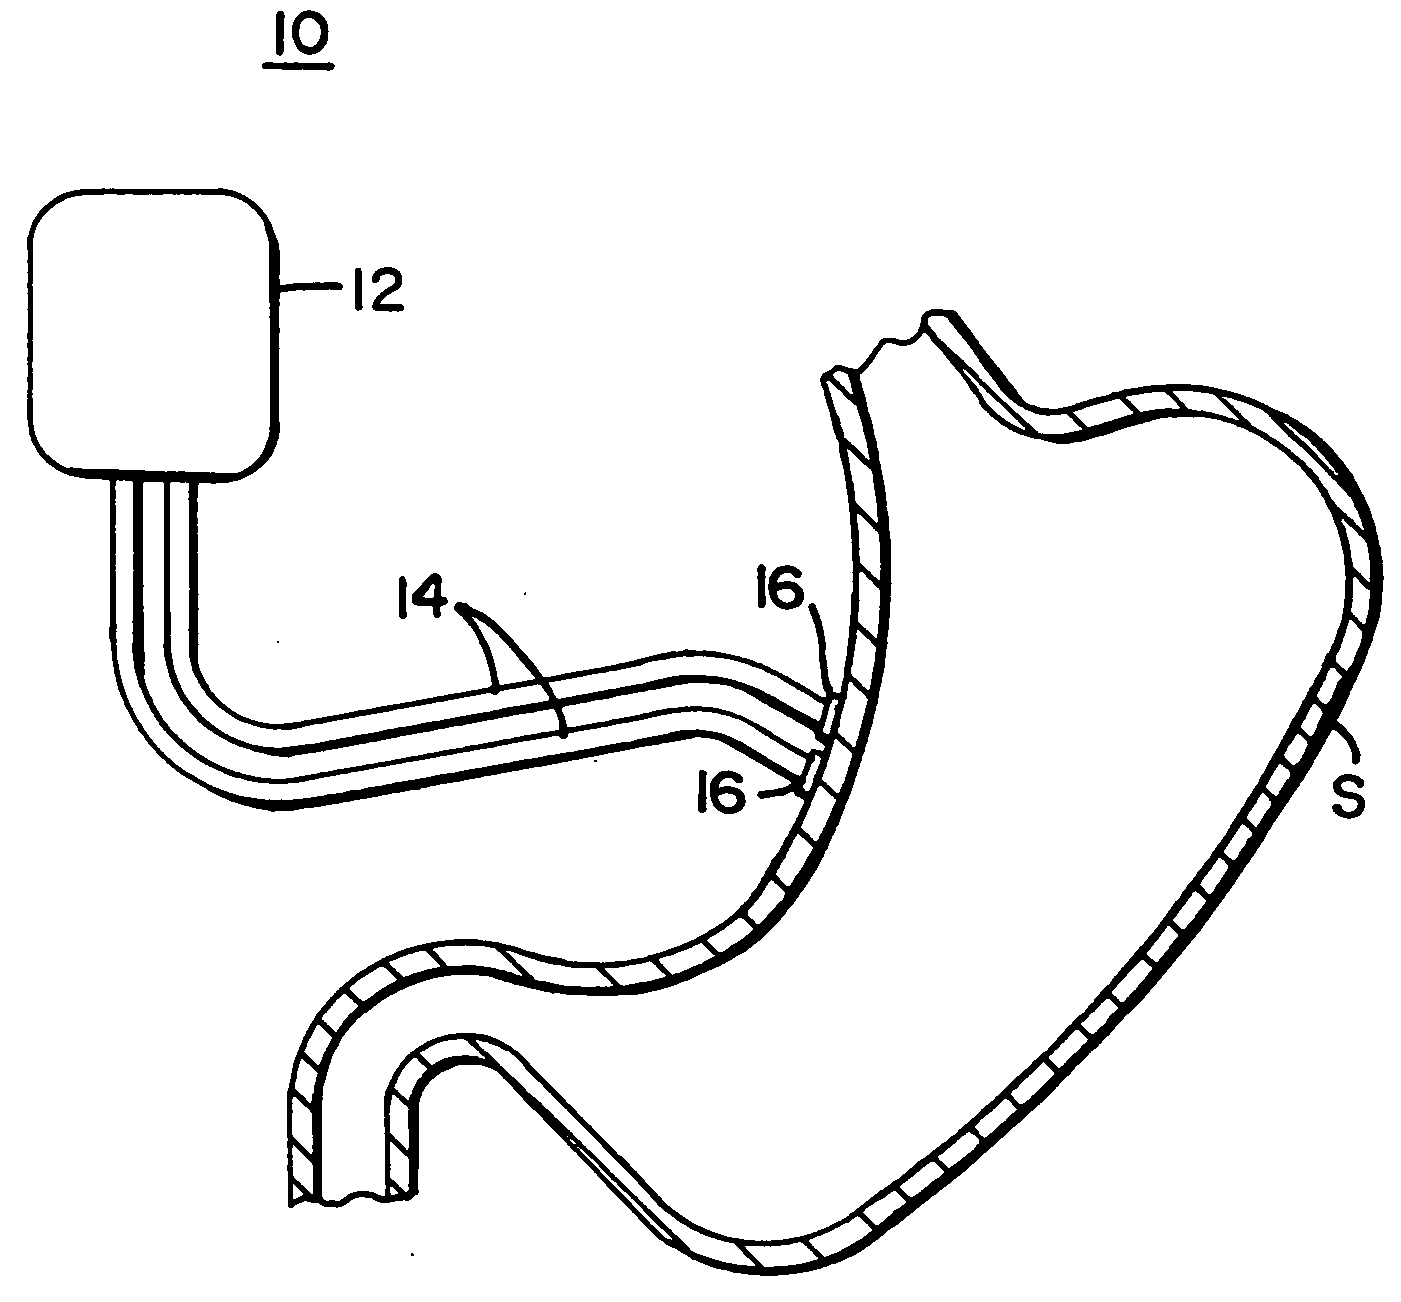 Gastric stimulator apparatus and method for use